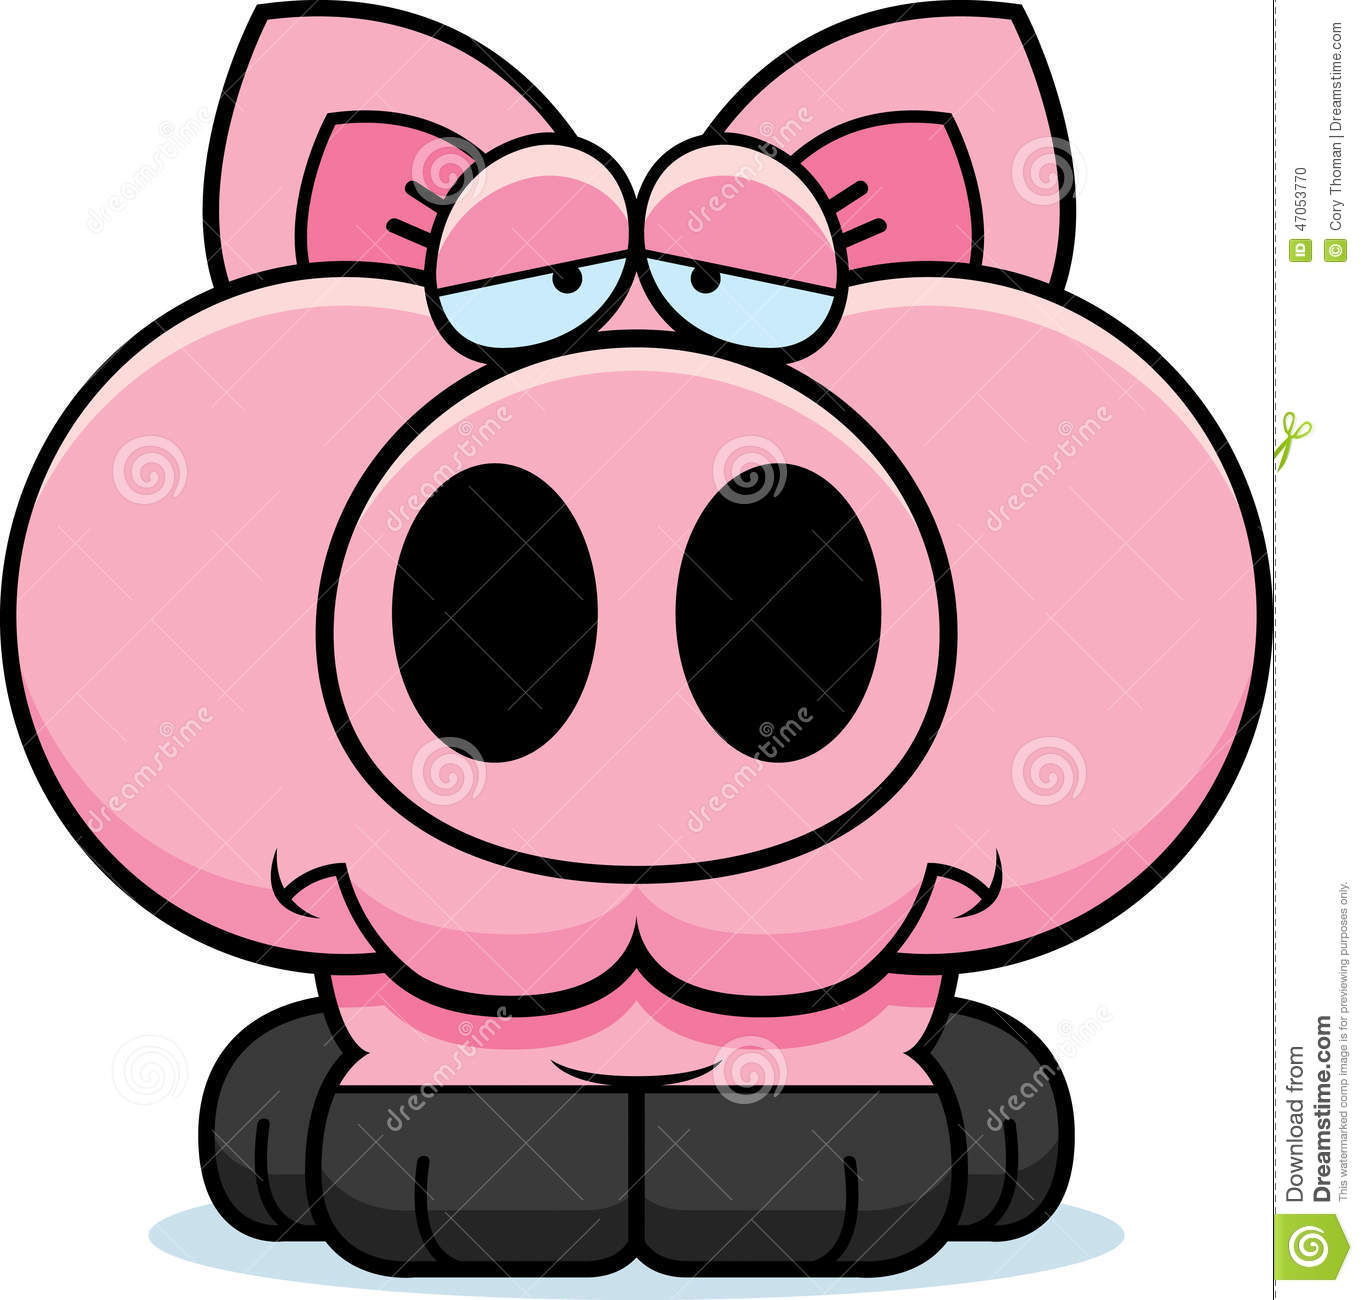 Cartoon Illustration Of A Little Pig With A Sad Expression